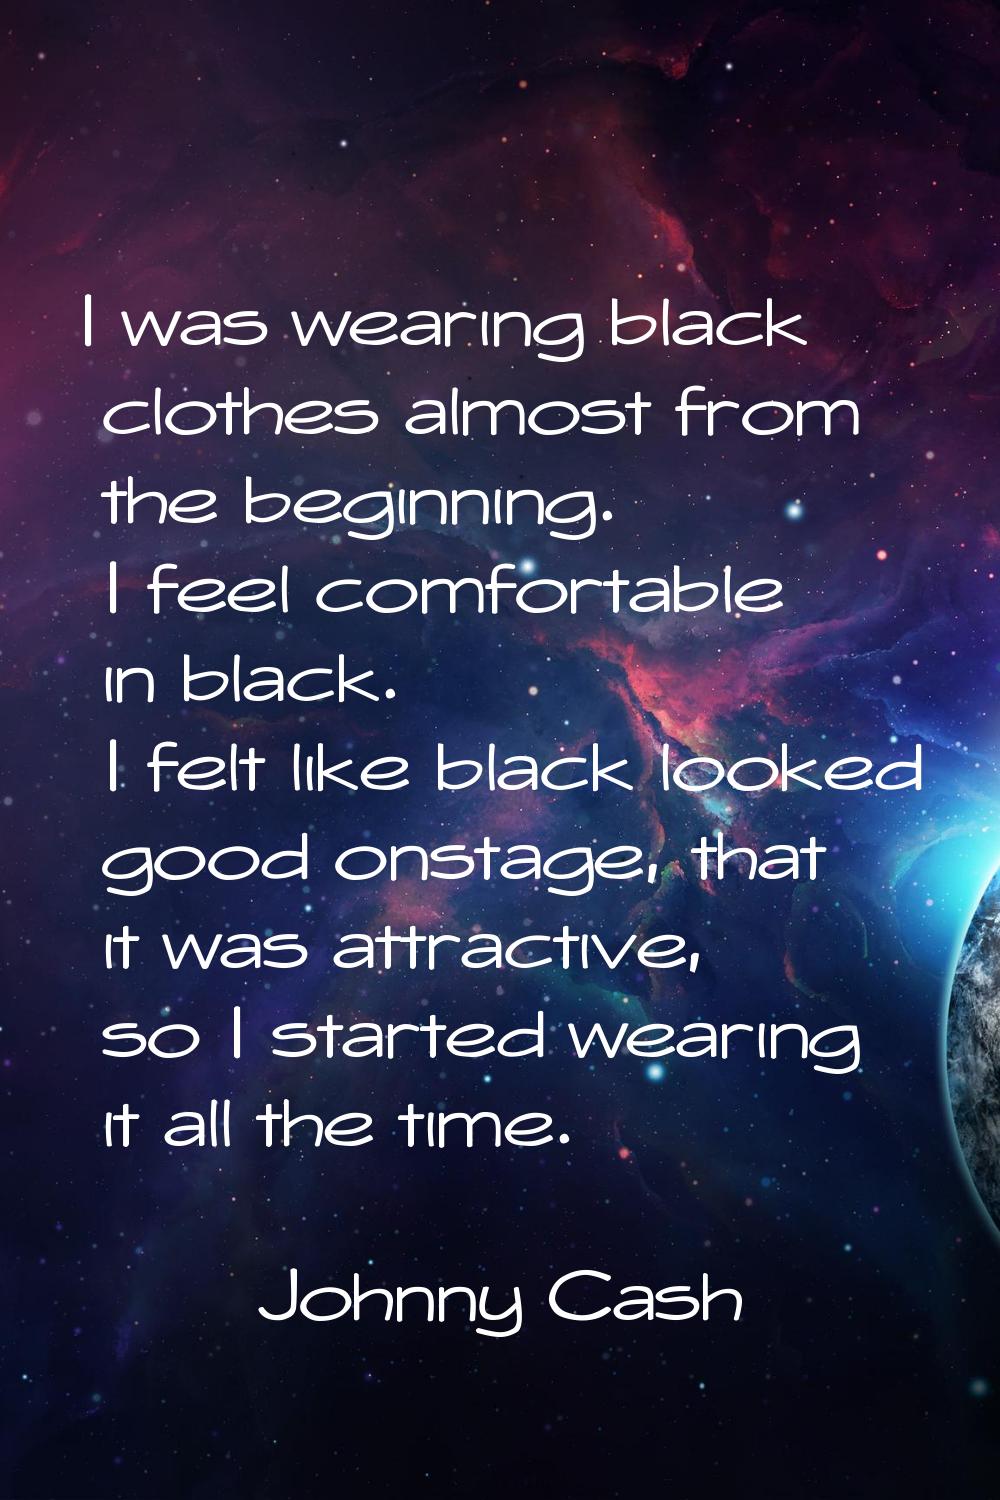 I was wearing black clothes almost from the beginning. I feel comfortable in black. I felt like bla